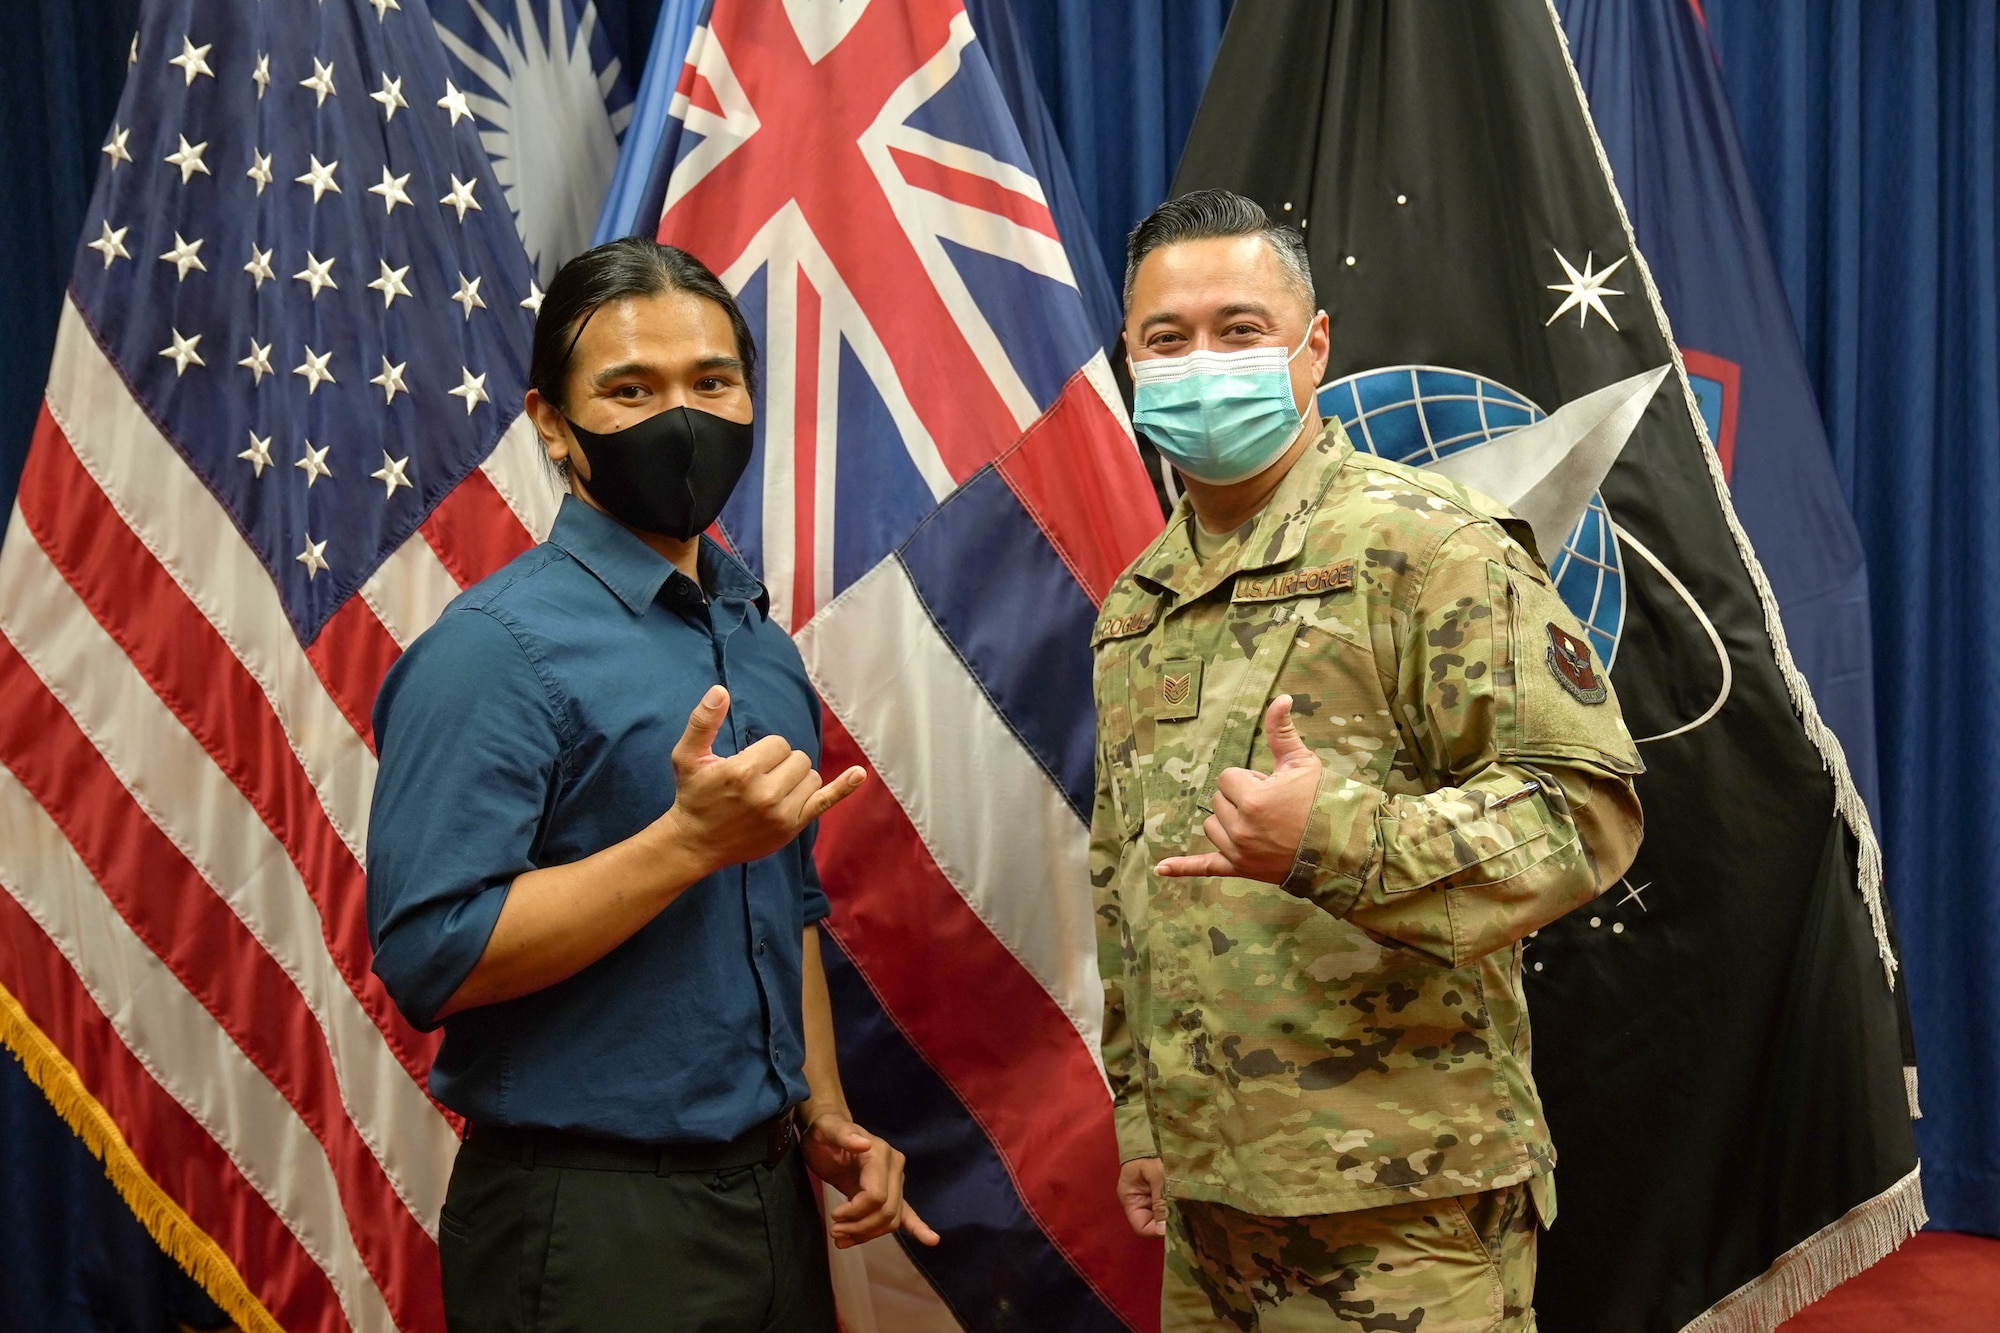 Reyjie Cliff Blando Madriaga, U.S. Space Force recruit, and his recruiter, U.S. Air Force Tech. Sgt. Shiloh Pogue, Pacific Operations Recruiter, after completing the oath of enlistment at Joint Base Pearl Harbor-Hickam, Hawaii, March 4, 2021. Madriaga, born and raised in Hawaii, is the first Hawaiian U.S. Space Force Recruit to swear into the Delayed Entry Program at Honolulu Military Entrance Processing Center.  (U.S. Air Force photo by Airman 1st Class Makensie Cooper)